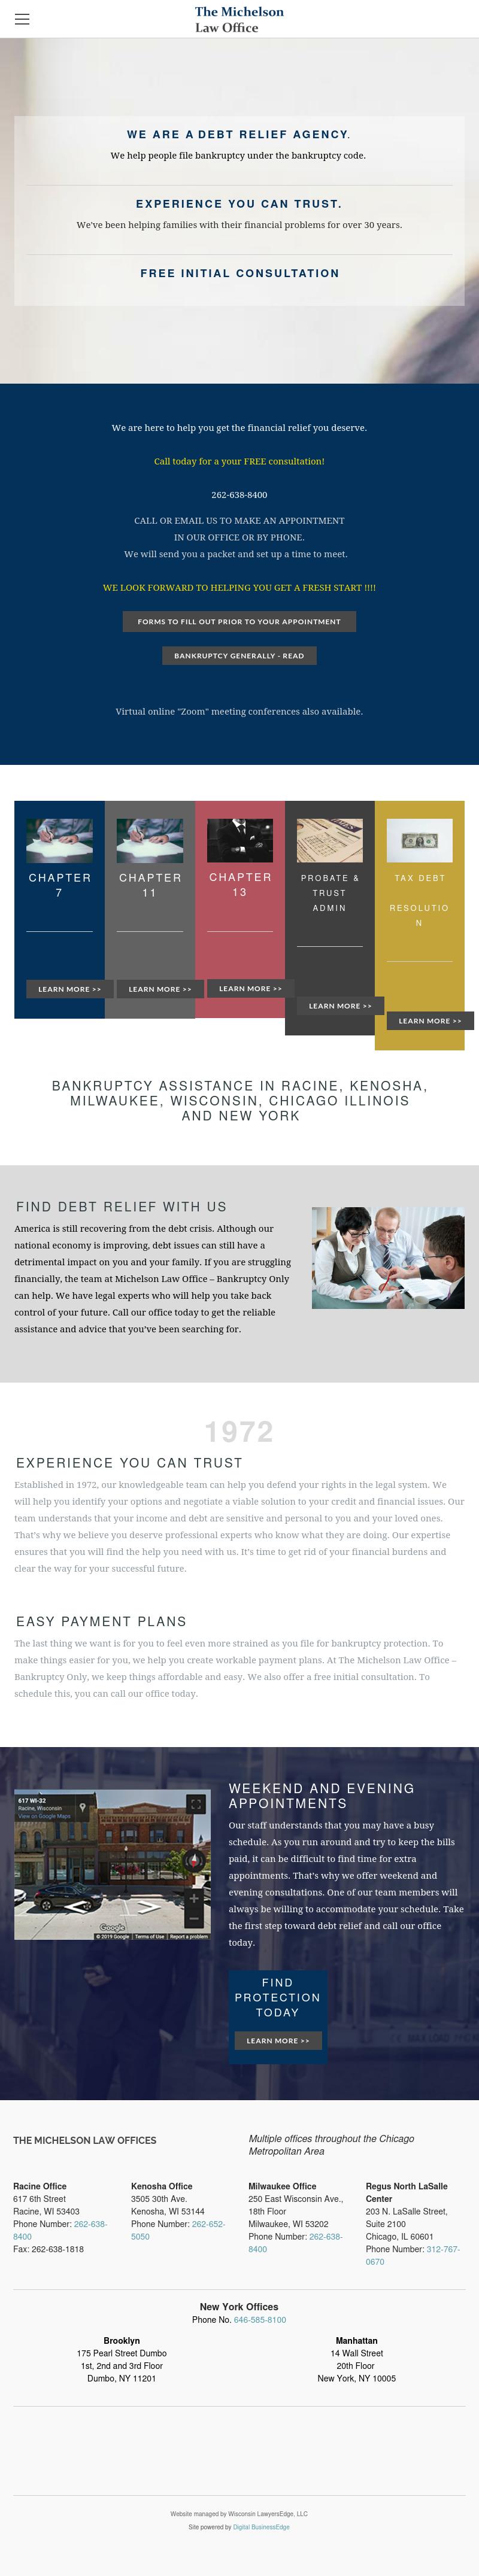 The Michelson Law Office - Bankruptcy Only - Kenosha WI Lawyers